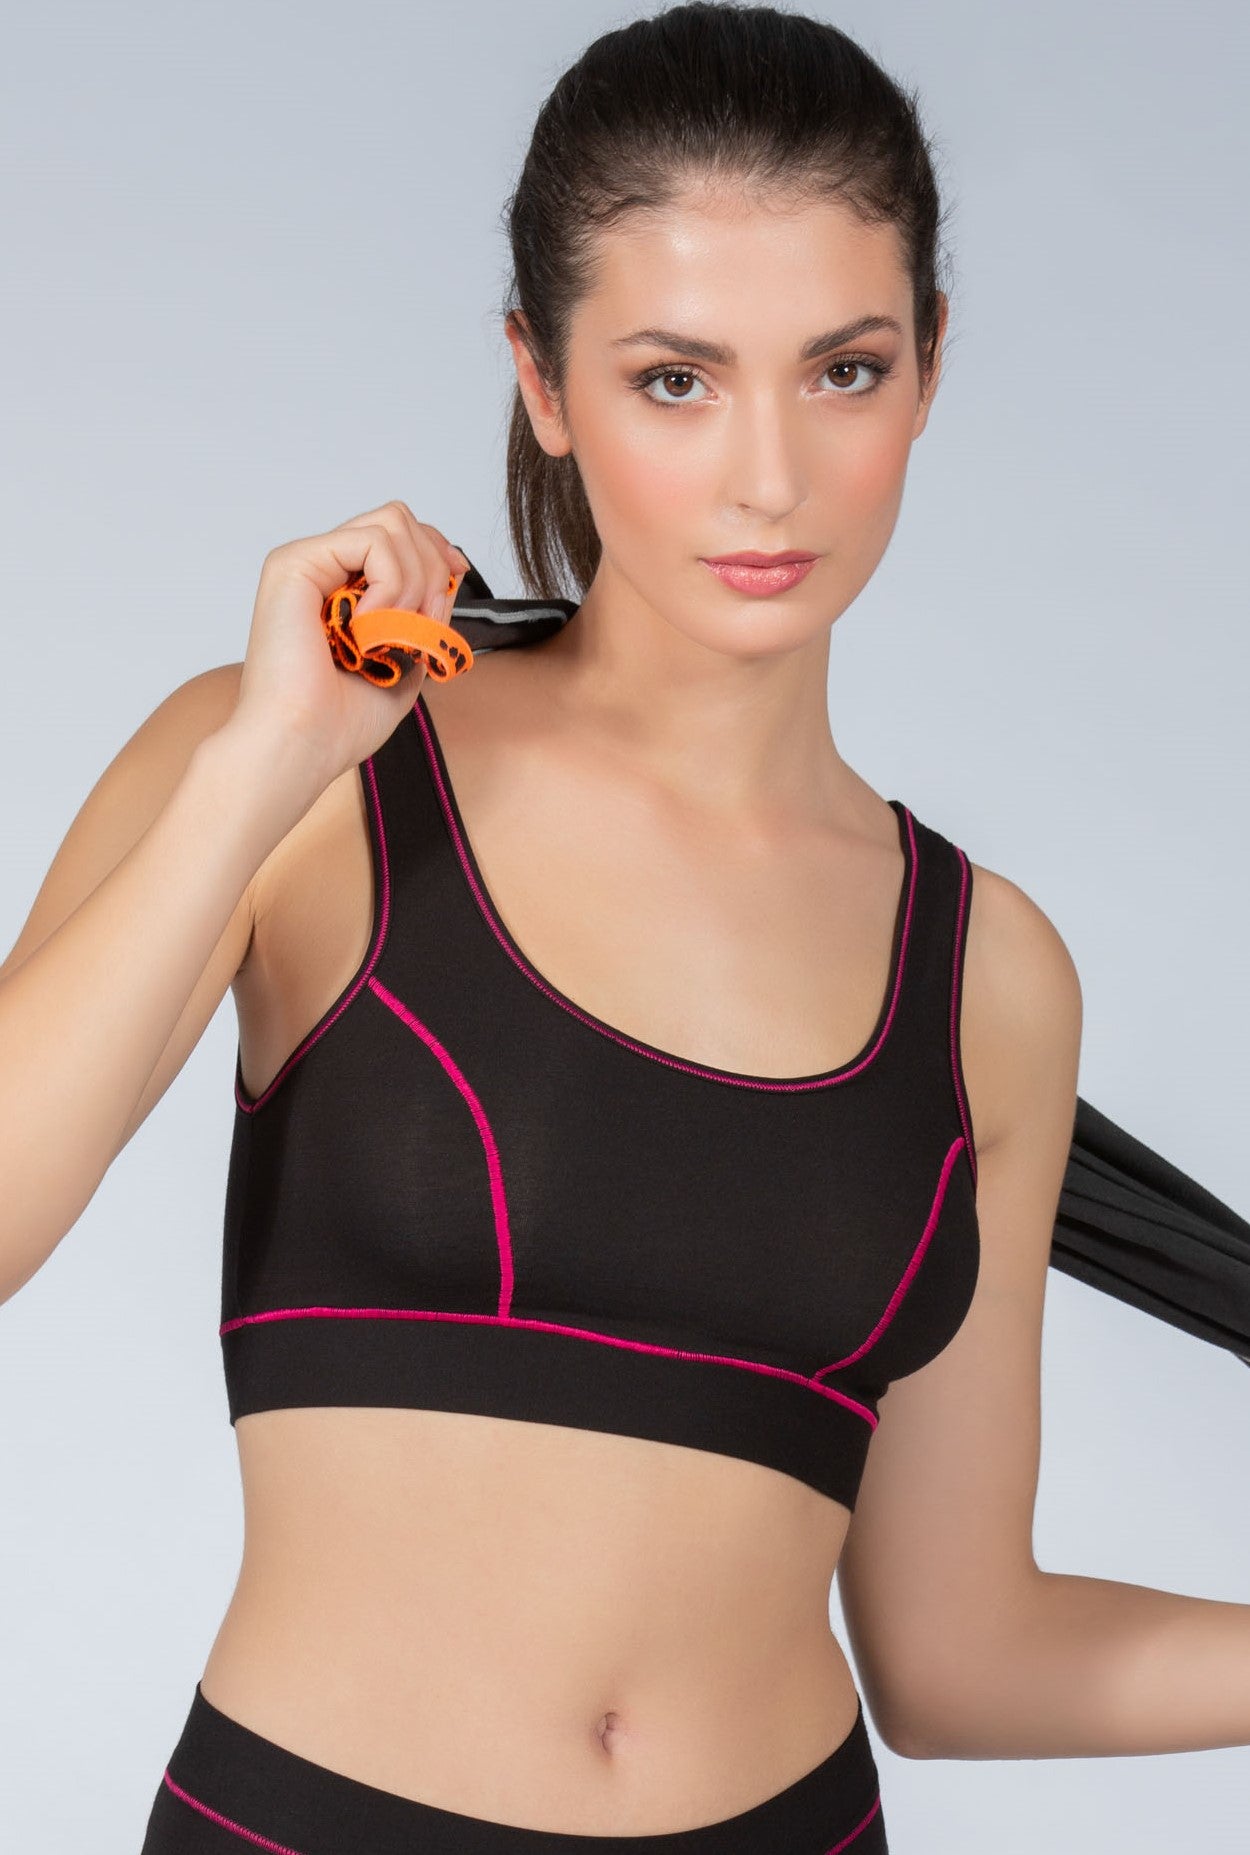 This bralette offers a weightless feel with its comfort-focused, metal-free construction. Crafted from high-quality Lenzing Modal® fabric, it is lightweight and pleasantly soft to the touch. EGi garments are tested and meet the requirements of Oeko-Tex Standard 100, ensuring they are free of hazardous materials.